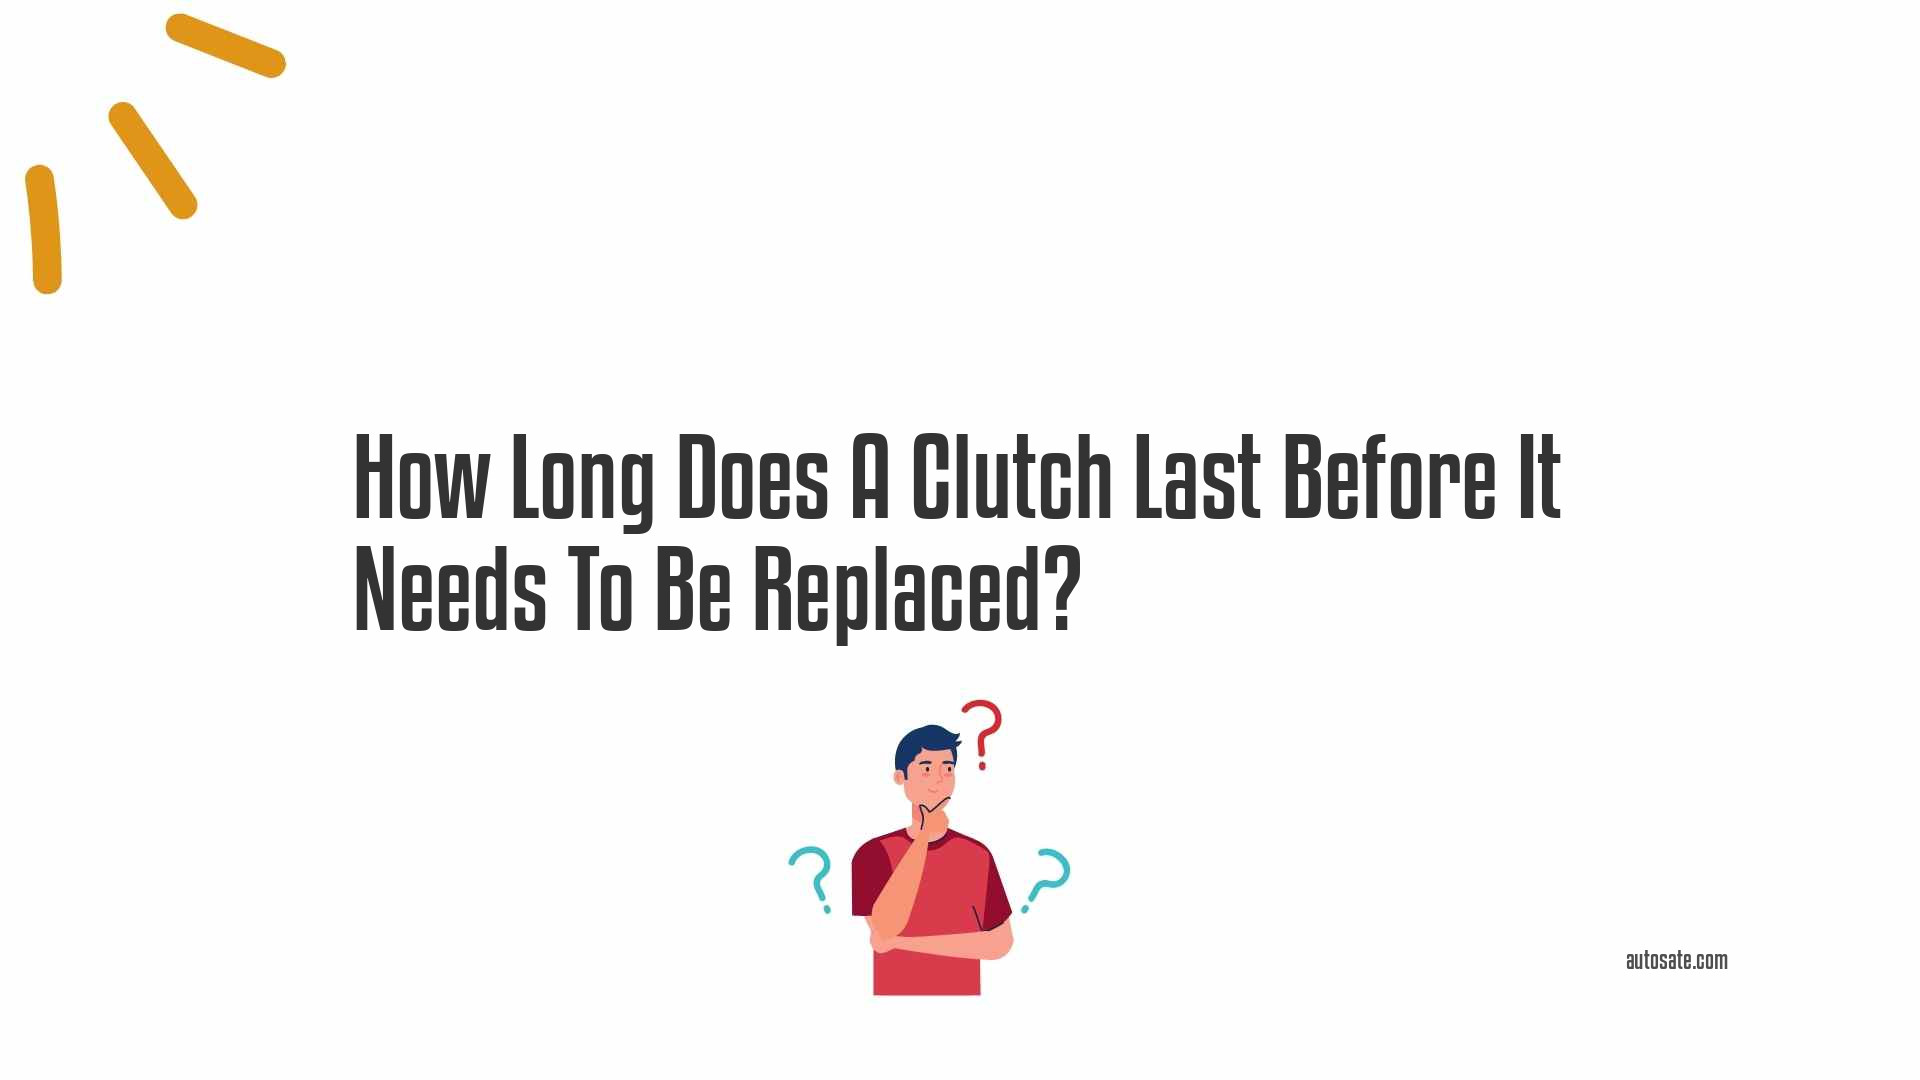 How Long Does A Clutch Last Before It Needs To Be Replaced?